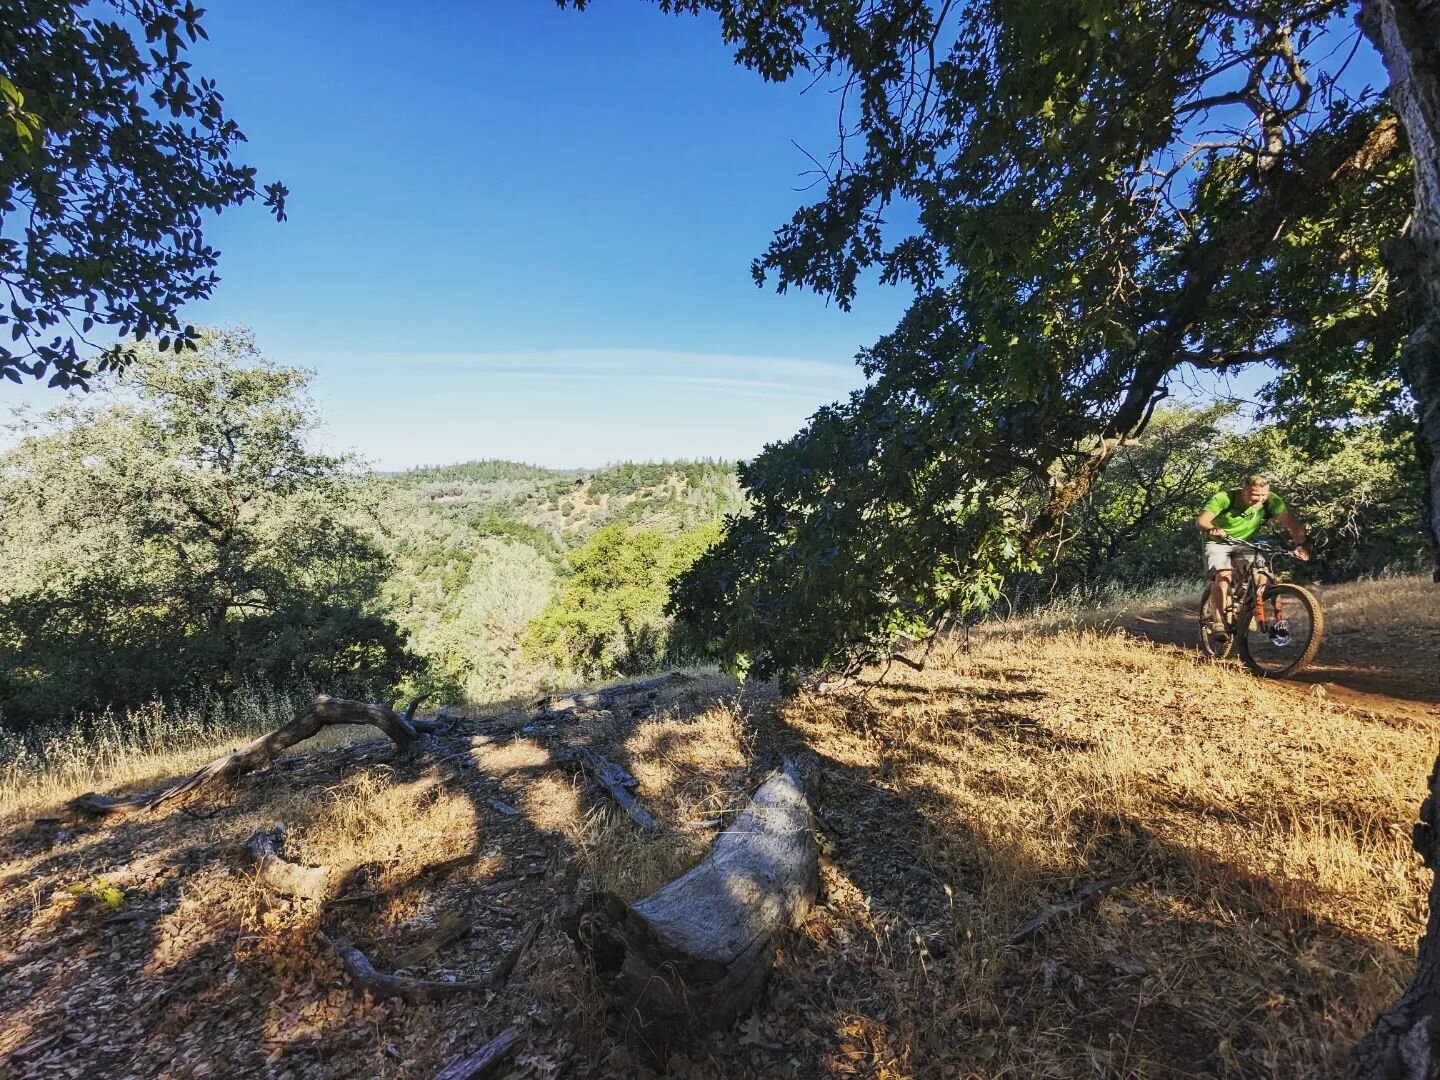 Good times on the Foresthill trail! This time with a new (to me) bike!
.
Thanks always to ZD for the navigation and planning and tips (AND flat tire support).